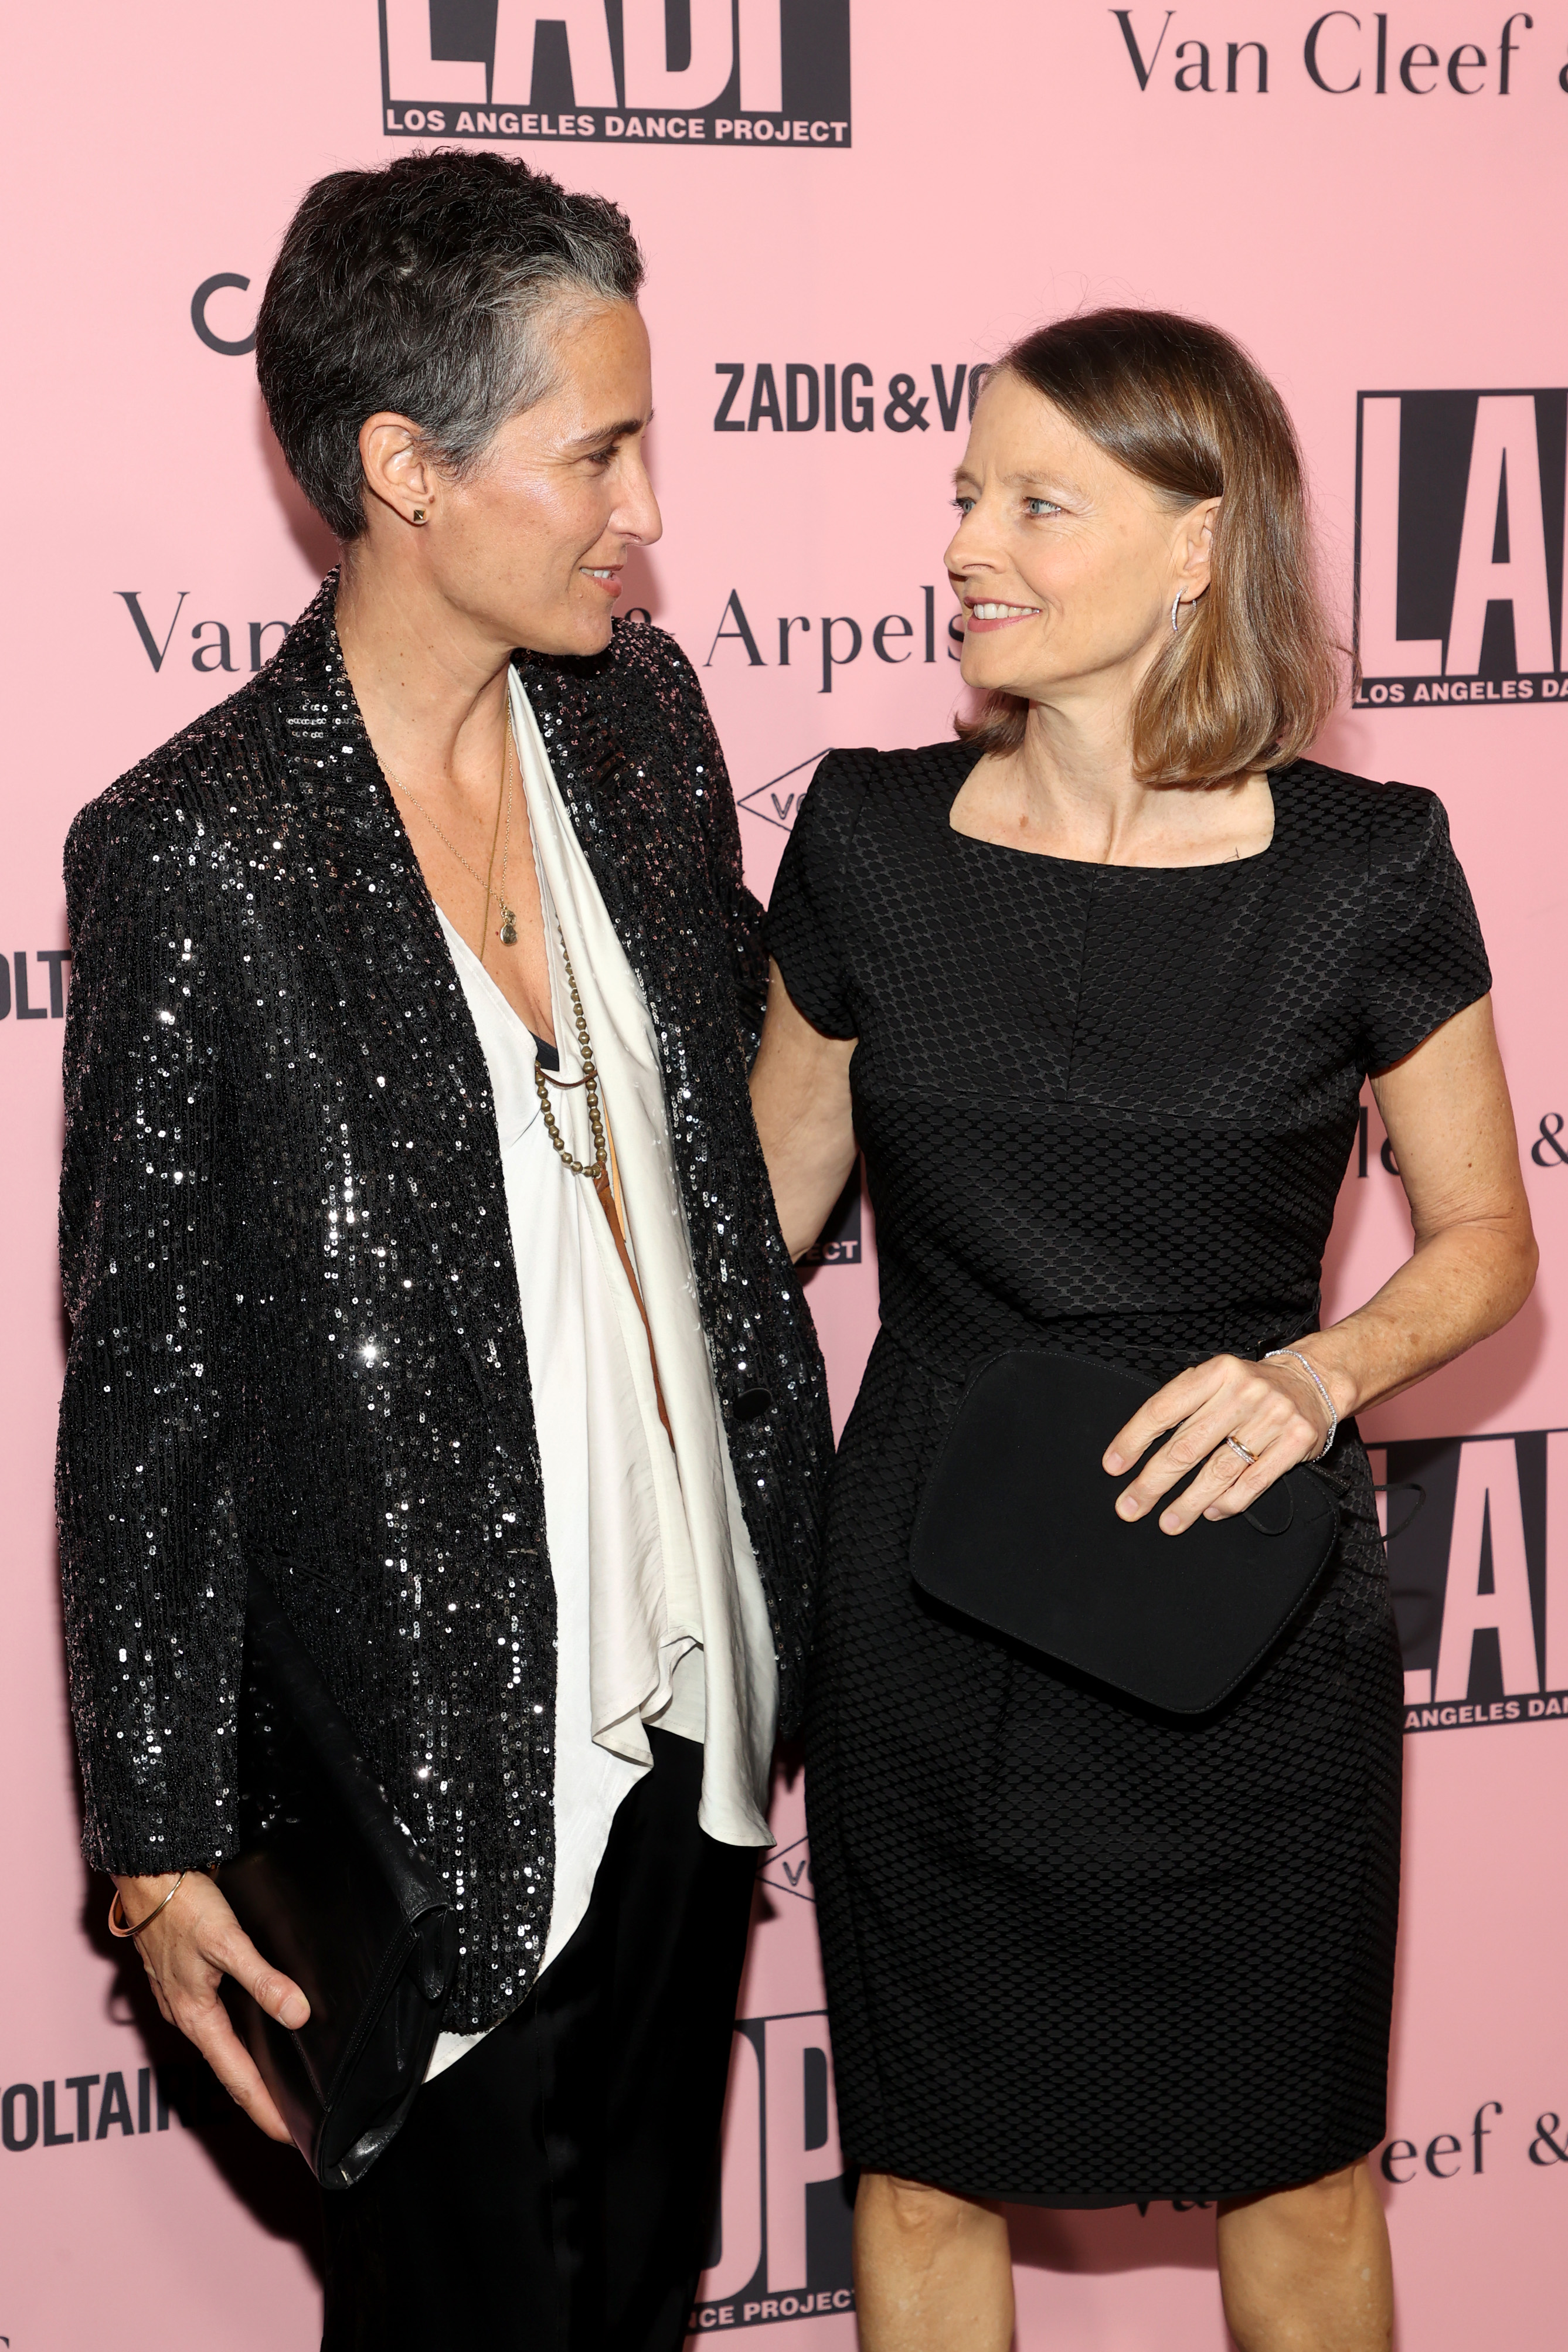 Alexandra Hedison and Jodie Foster at the L.A. Dance Project Annual Gala in Los Angeles, California on October 16, 2021 | Source: Getty Images